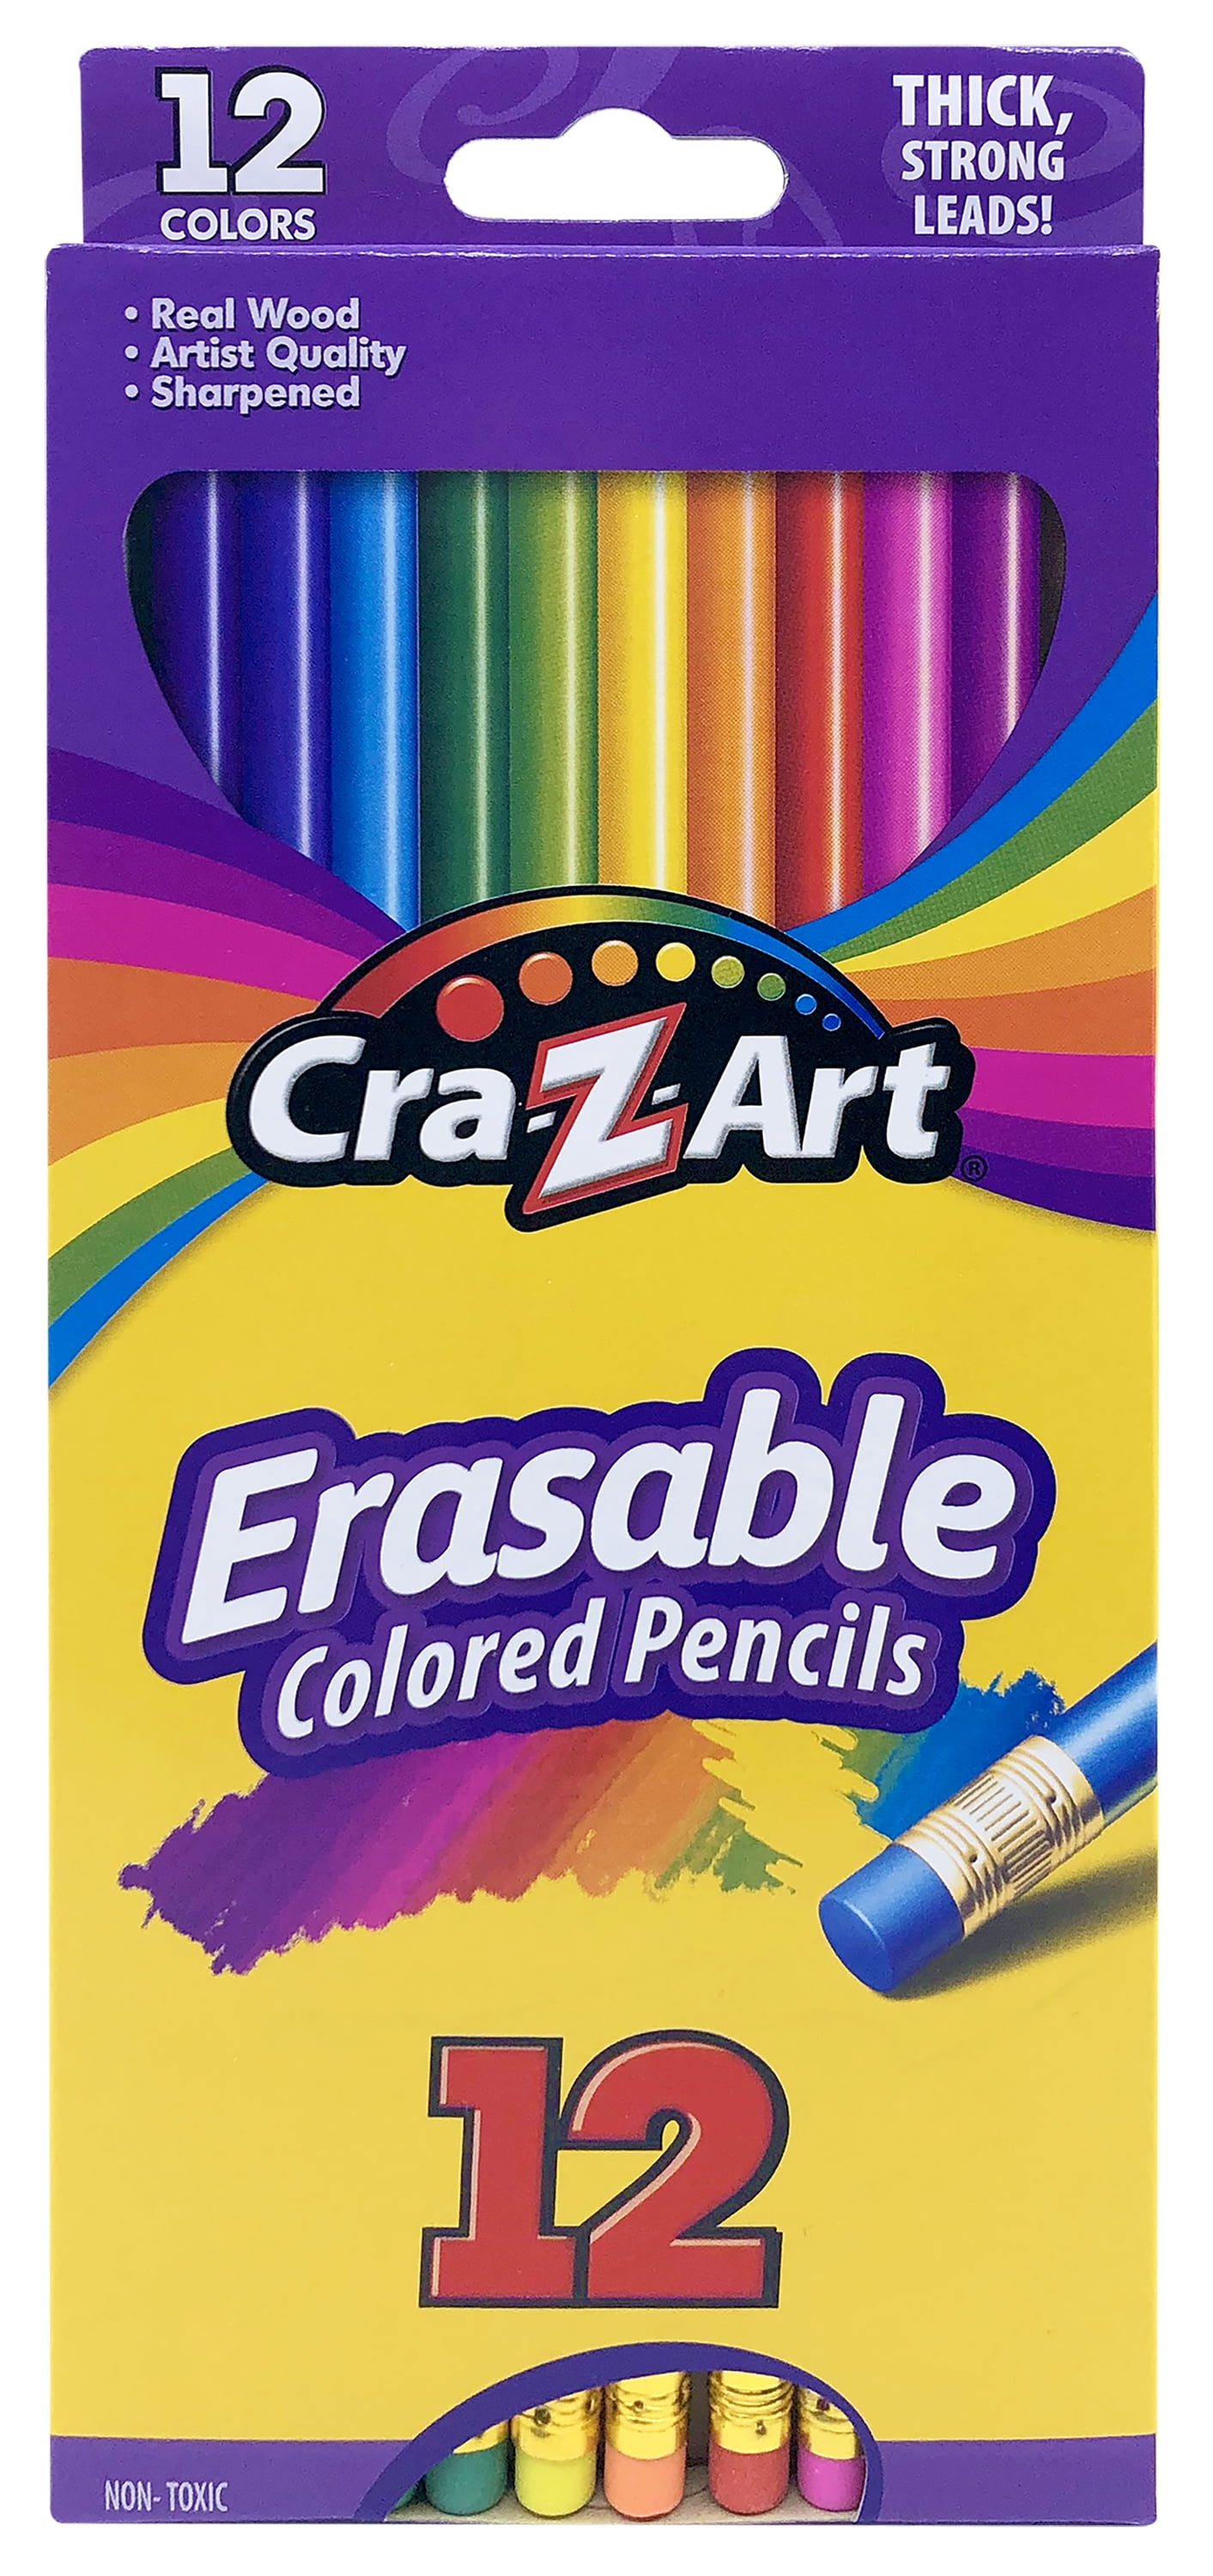 Cra-Z-Art Timeless Creations Shade & Blend, Multicolor Coloring Set,  Beginner, Child to Adult 